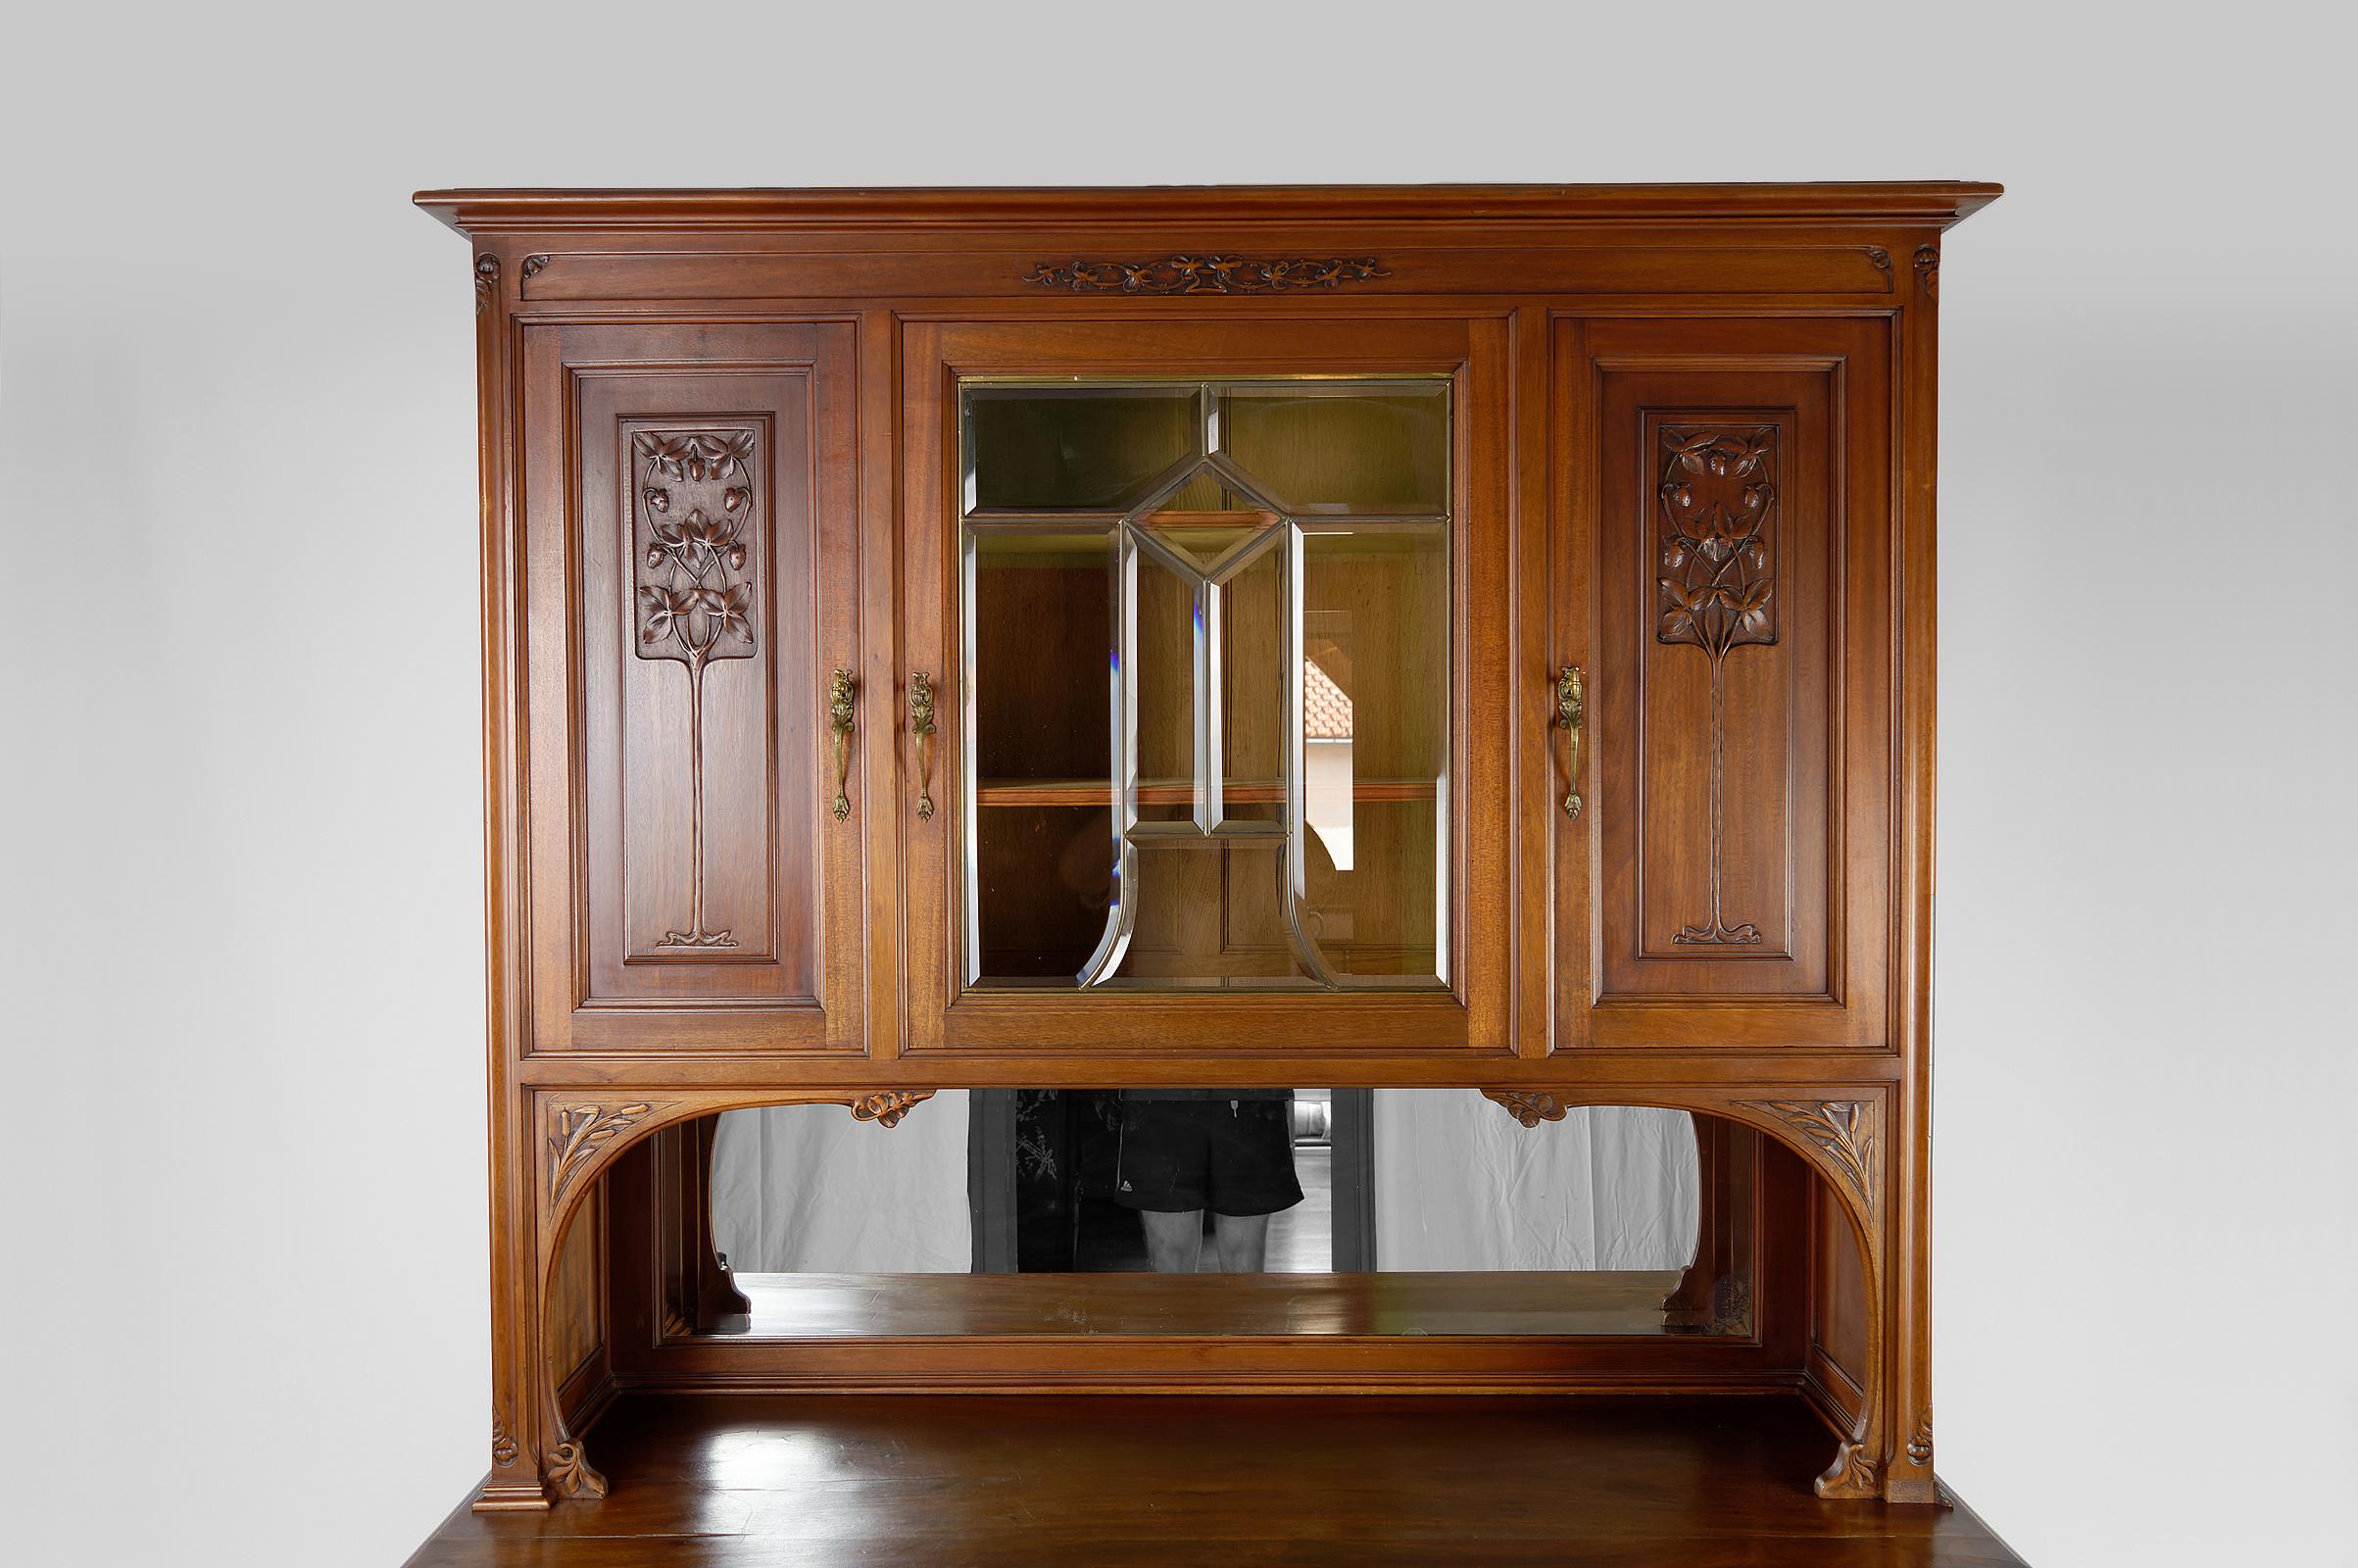 Brass French Art Nouveau Sideboard in Carved Walnut with Stained Glass, circa 1910